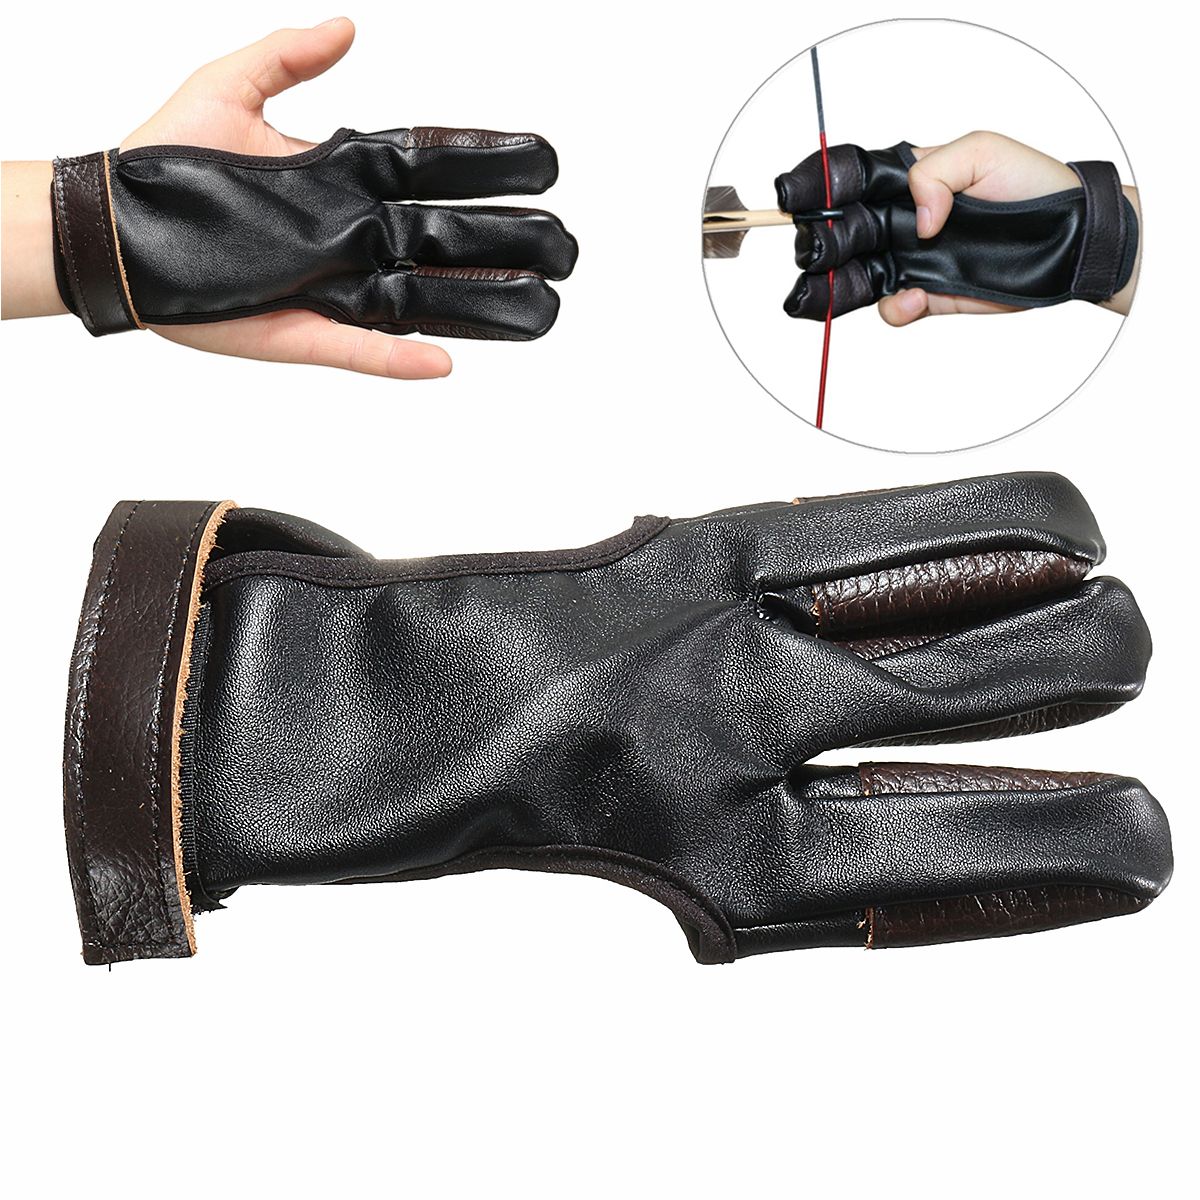 1Pcs-Archery-Finger-Protect-Glove-3-Finger-Pull-Bow-Leather-Shooting-Glove--for-Archery-Hunting-Shoo-1624284